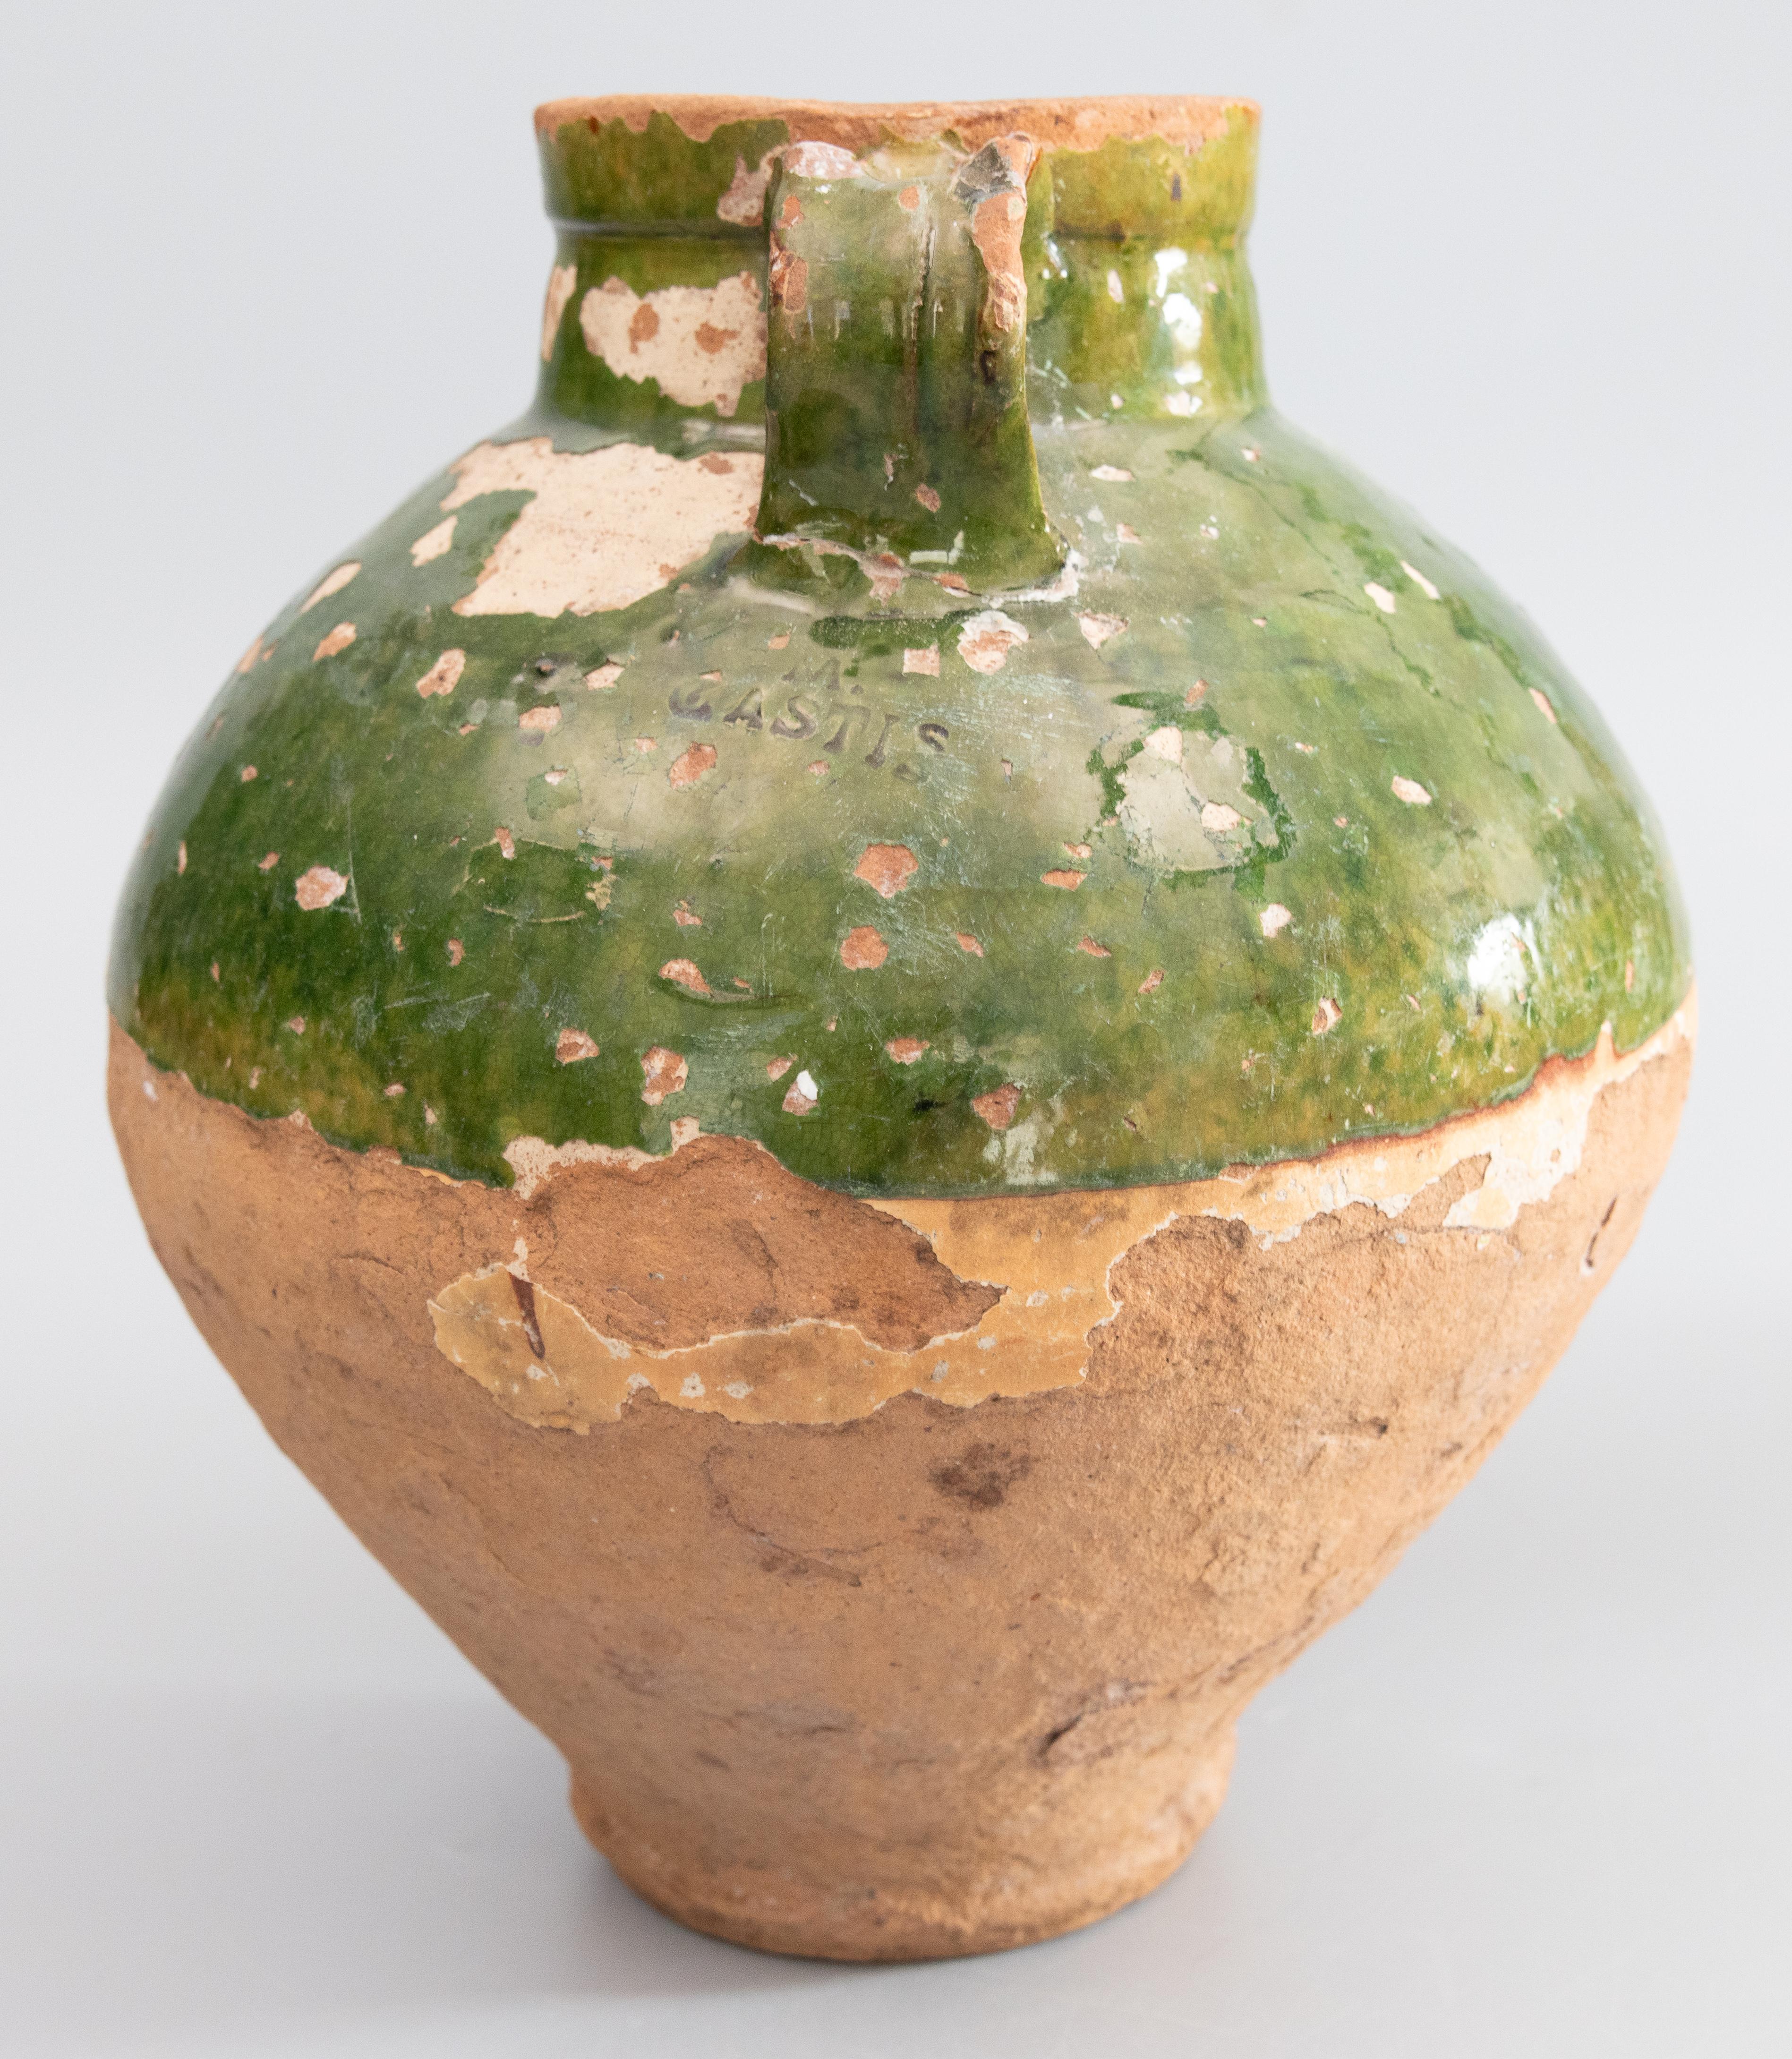 A superb 19th century French Provençal glazed terracotta olive jar or urn. Maker's mark under handle. These jars were used for storing and preserving olive oil. It would be beautiful with a bouquet of flowers or displayed on its own. These are also